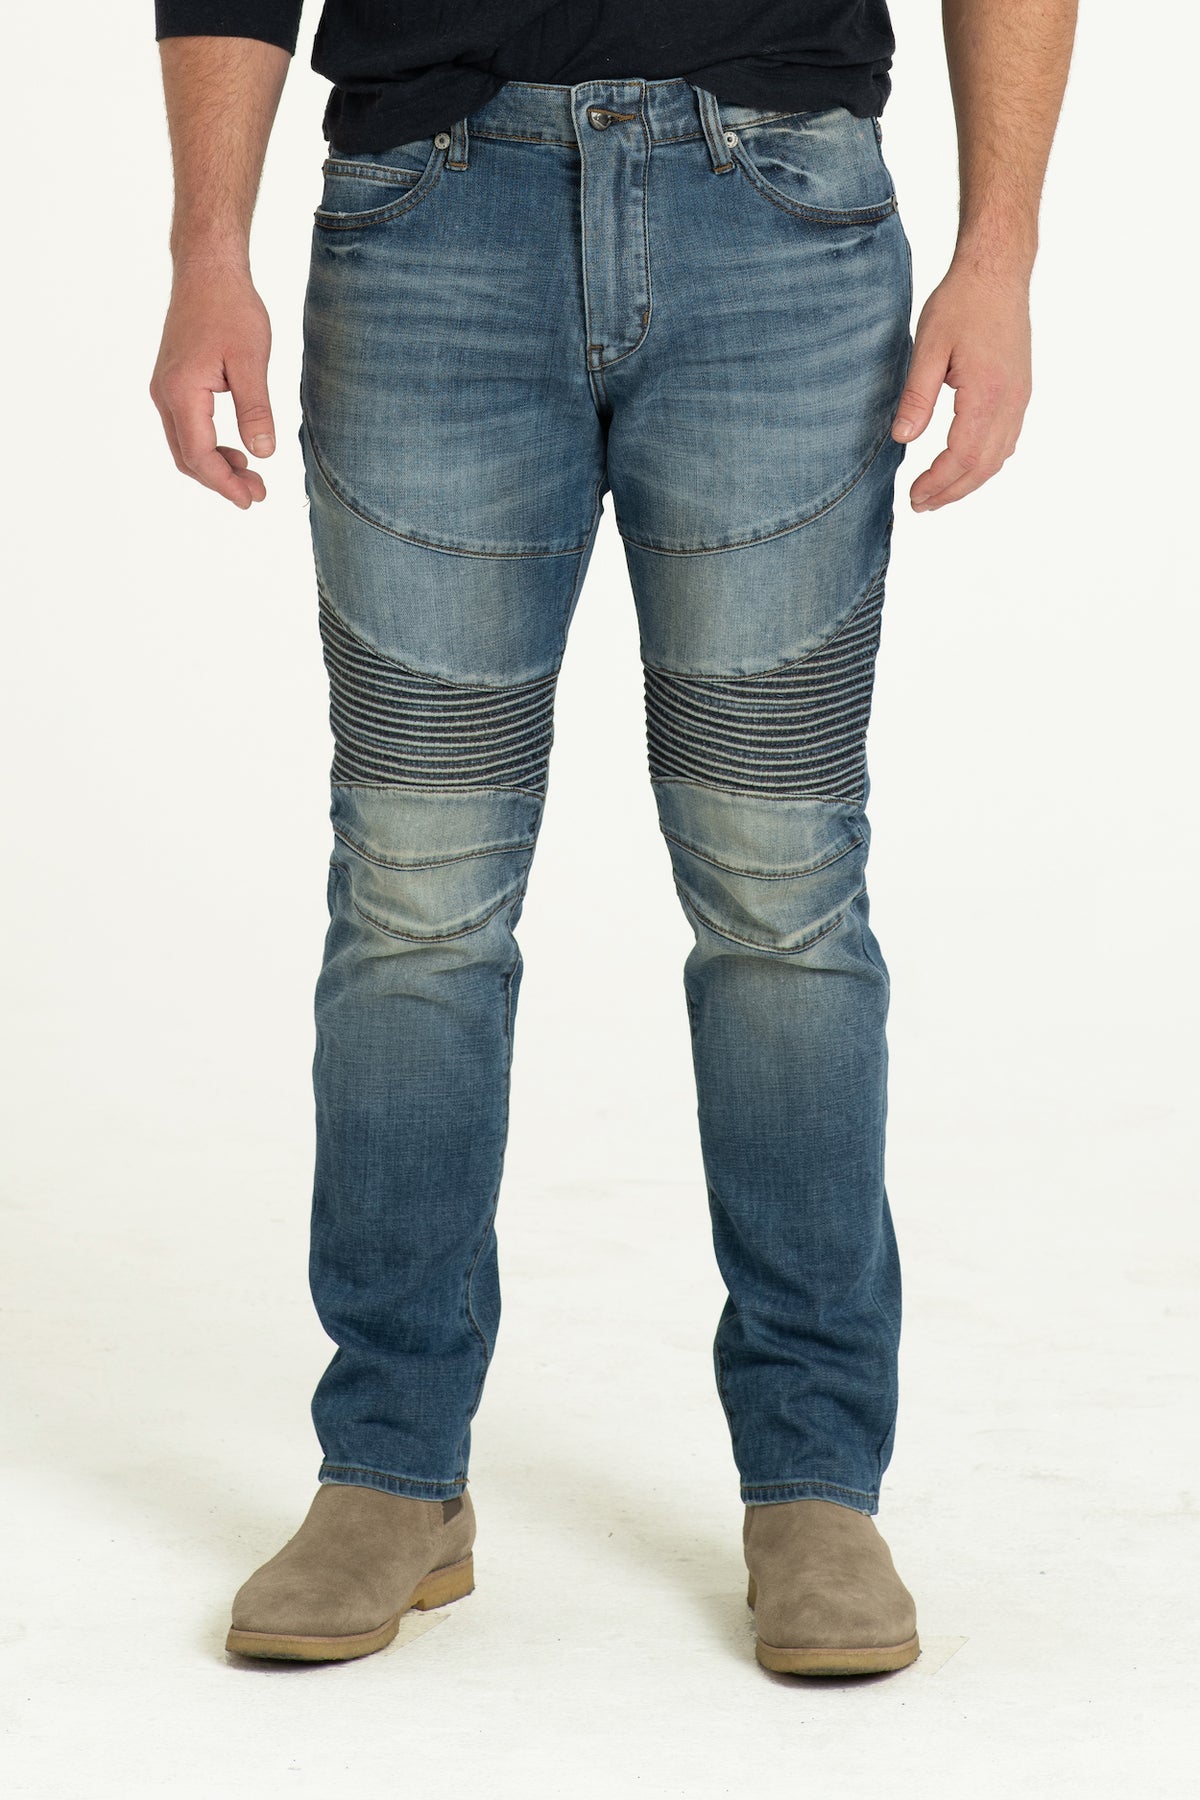 MOTO DENIM PANTS IN WASTED BLUES